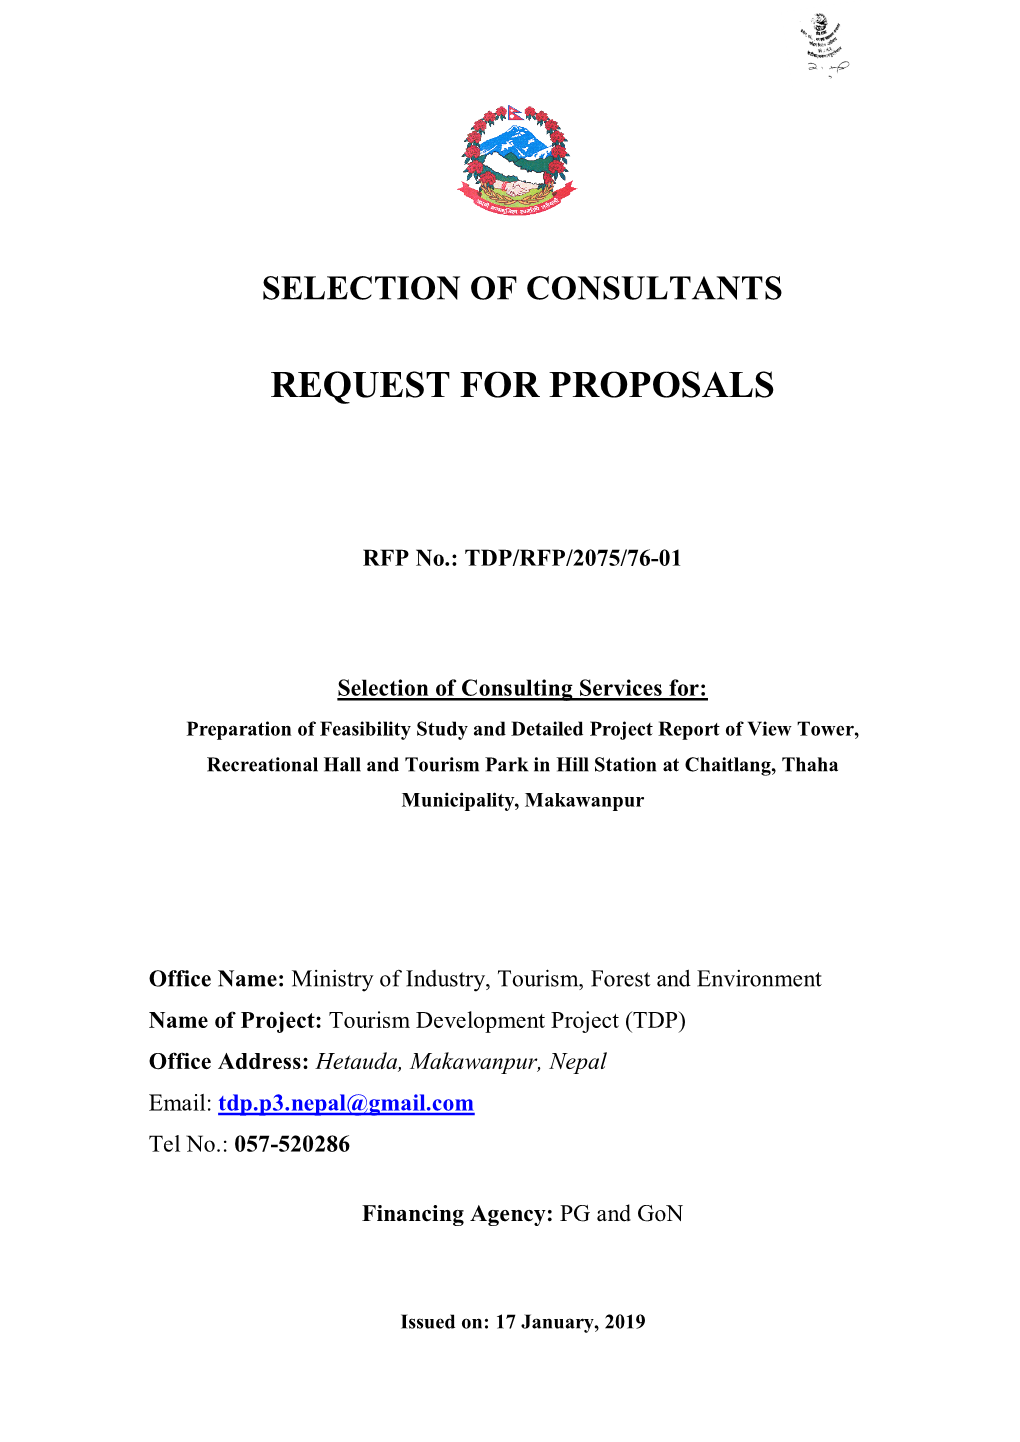 Standard Request for Proposals: Selection of Consultants